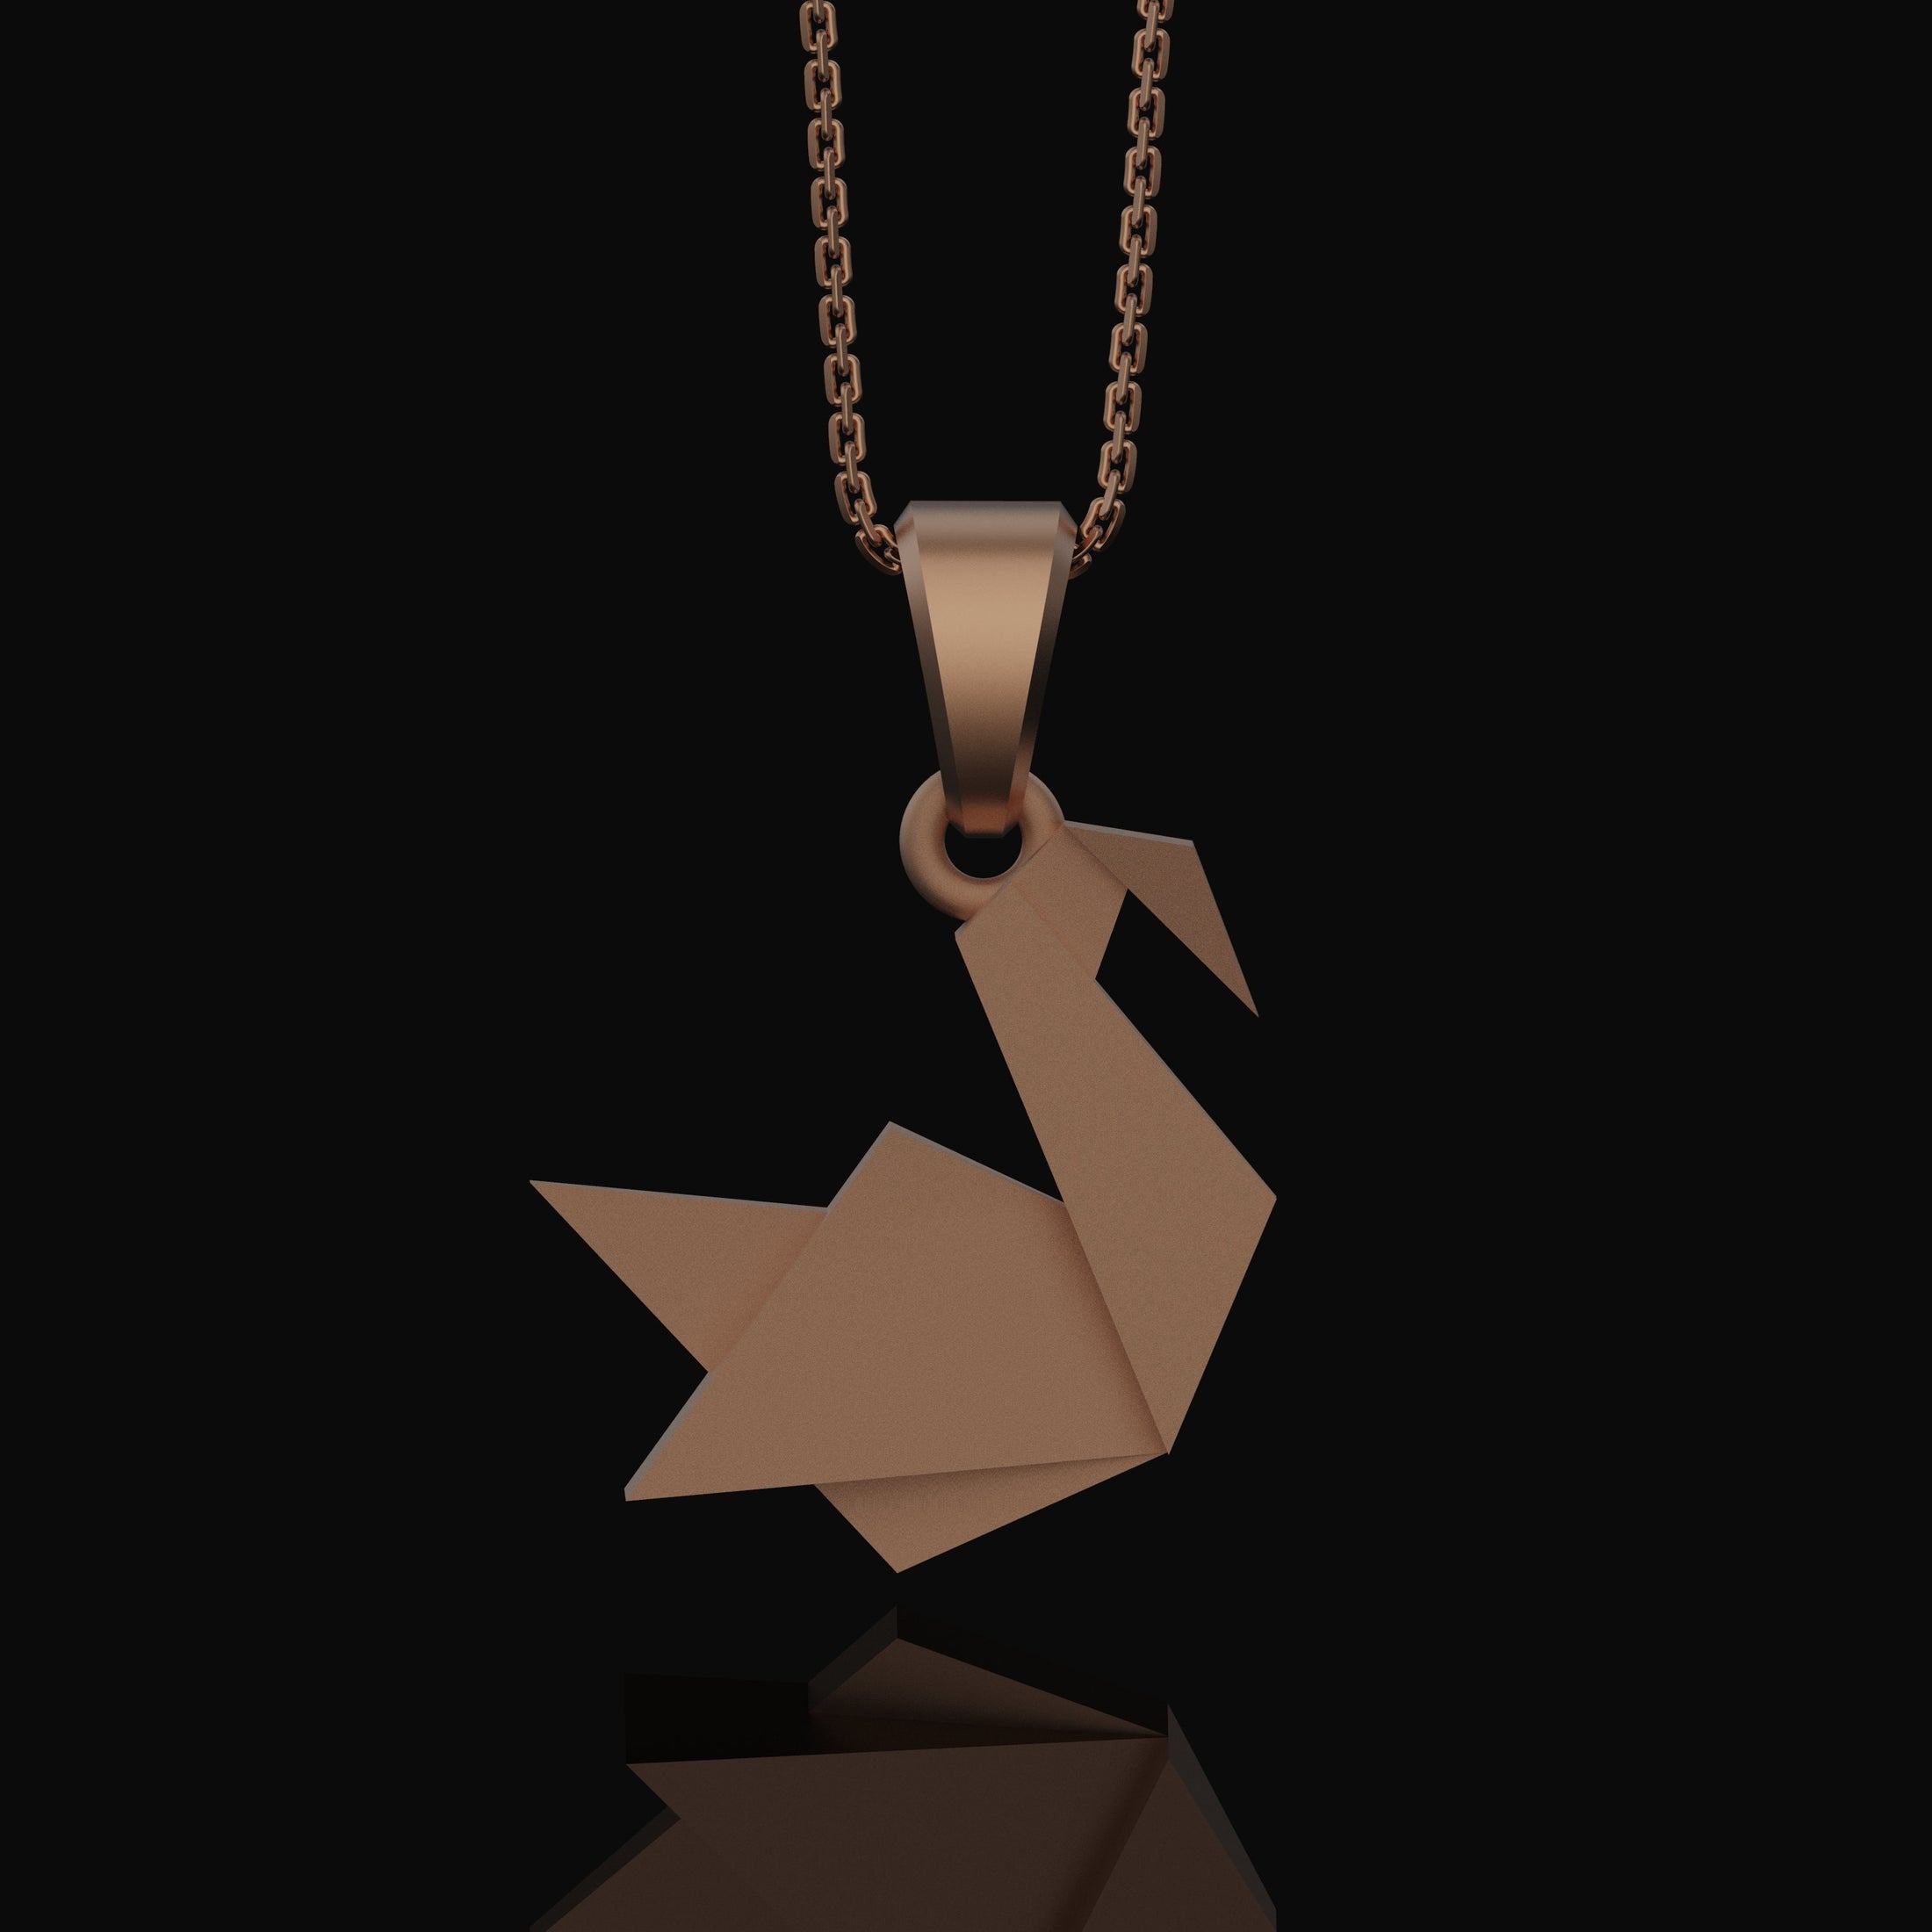 Silver Origami Swan Charm Necklace - Elegant Folded Swan Pendant, Chic and Artistic, Graceful Nature-Inspired Jewelry Rose Gold Matte